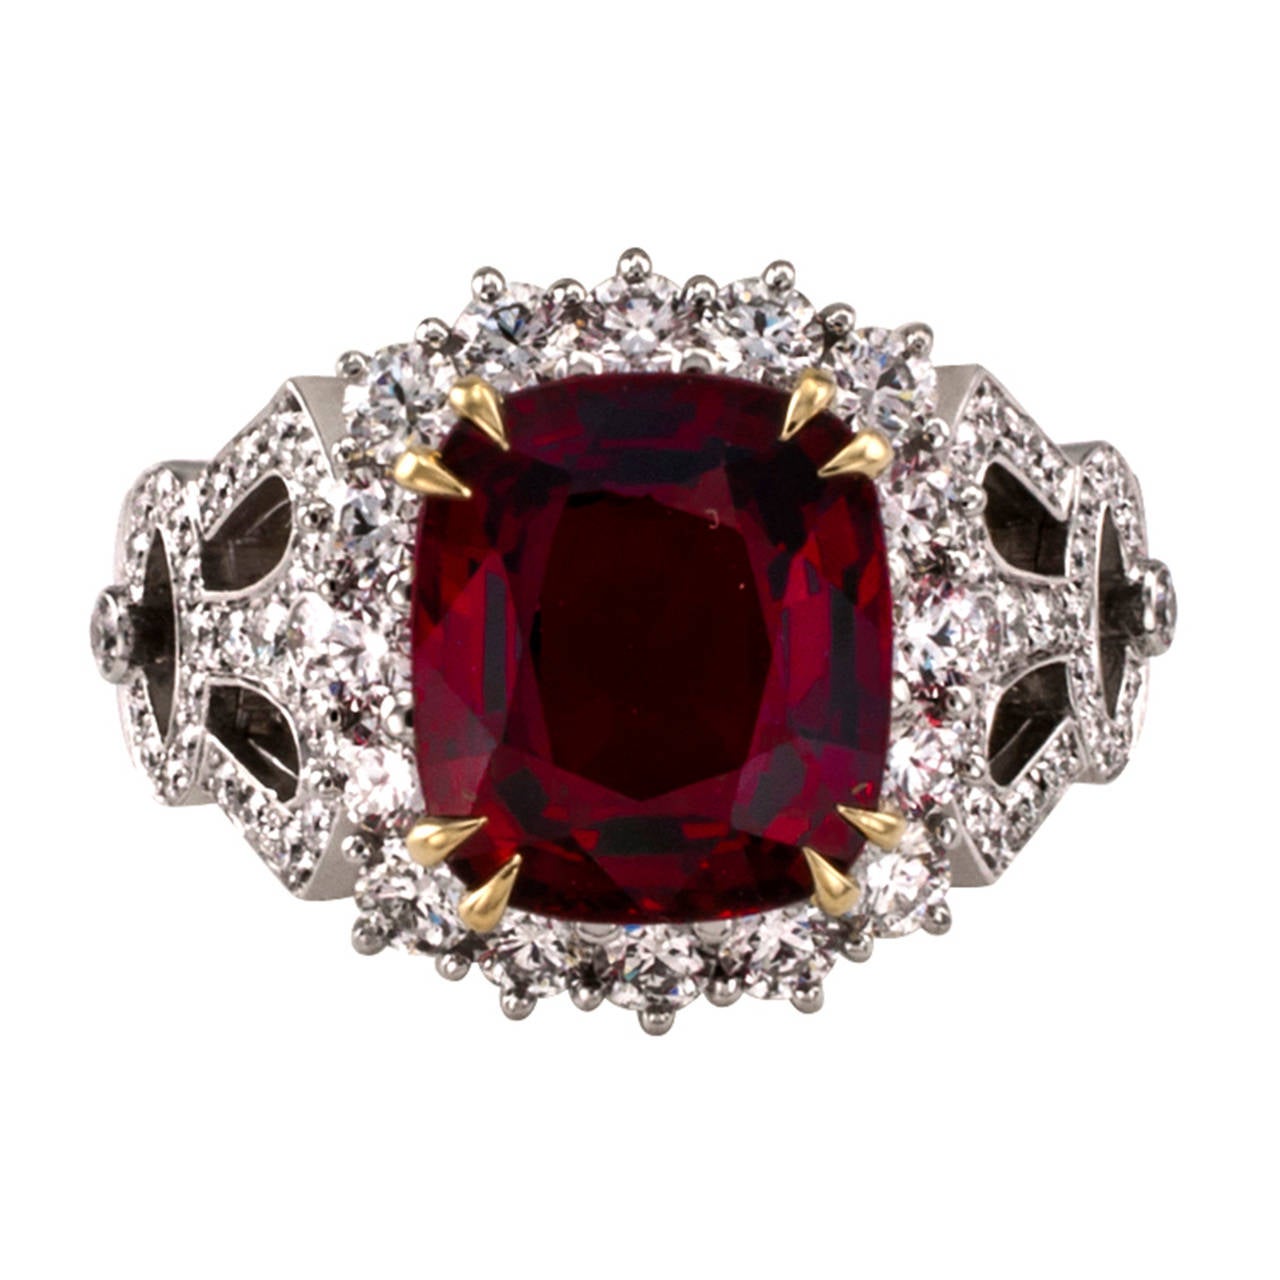 Garrard Estate Red Spinel And Diamond Ring

This beautiful contemporary design centers upon a fine, gold-set, electrifying cushion-shaped red spinel weighing approximately 3.75 carats, on an attractive platinum mount set with 74 round